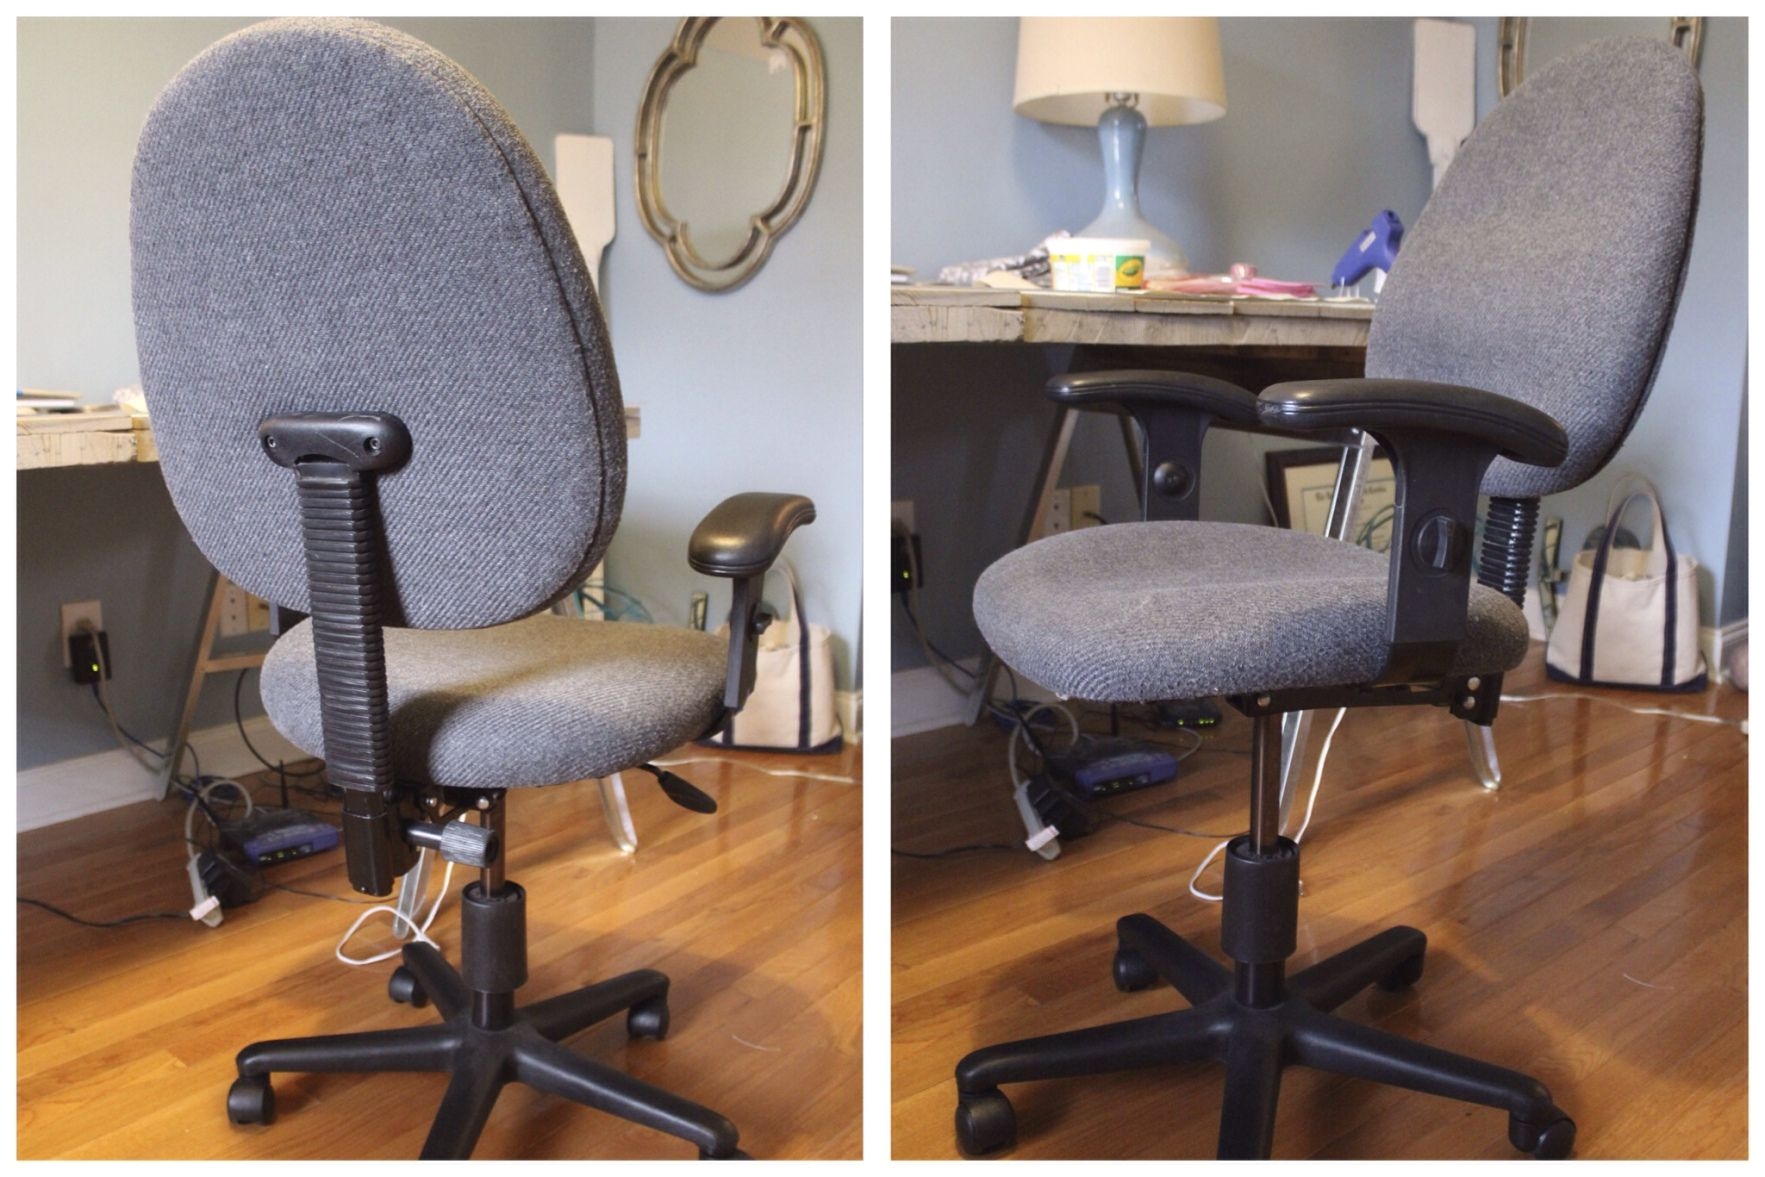 20 reupholster office chair best paint for wood furniture check more at http